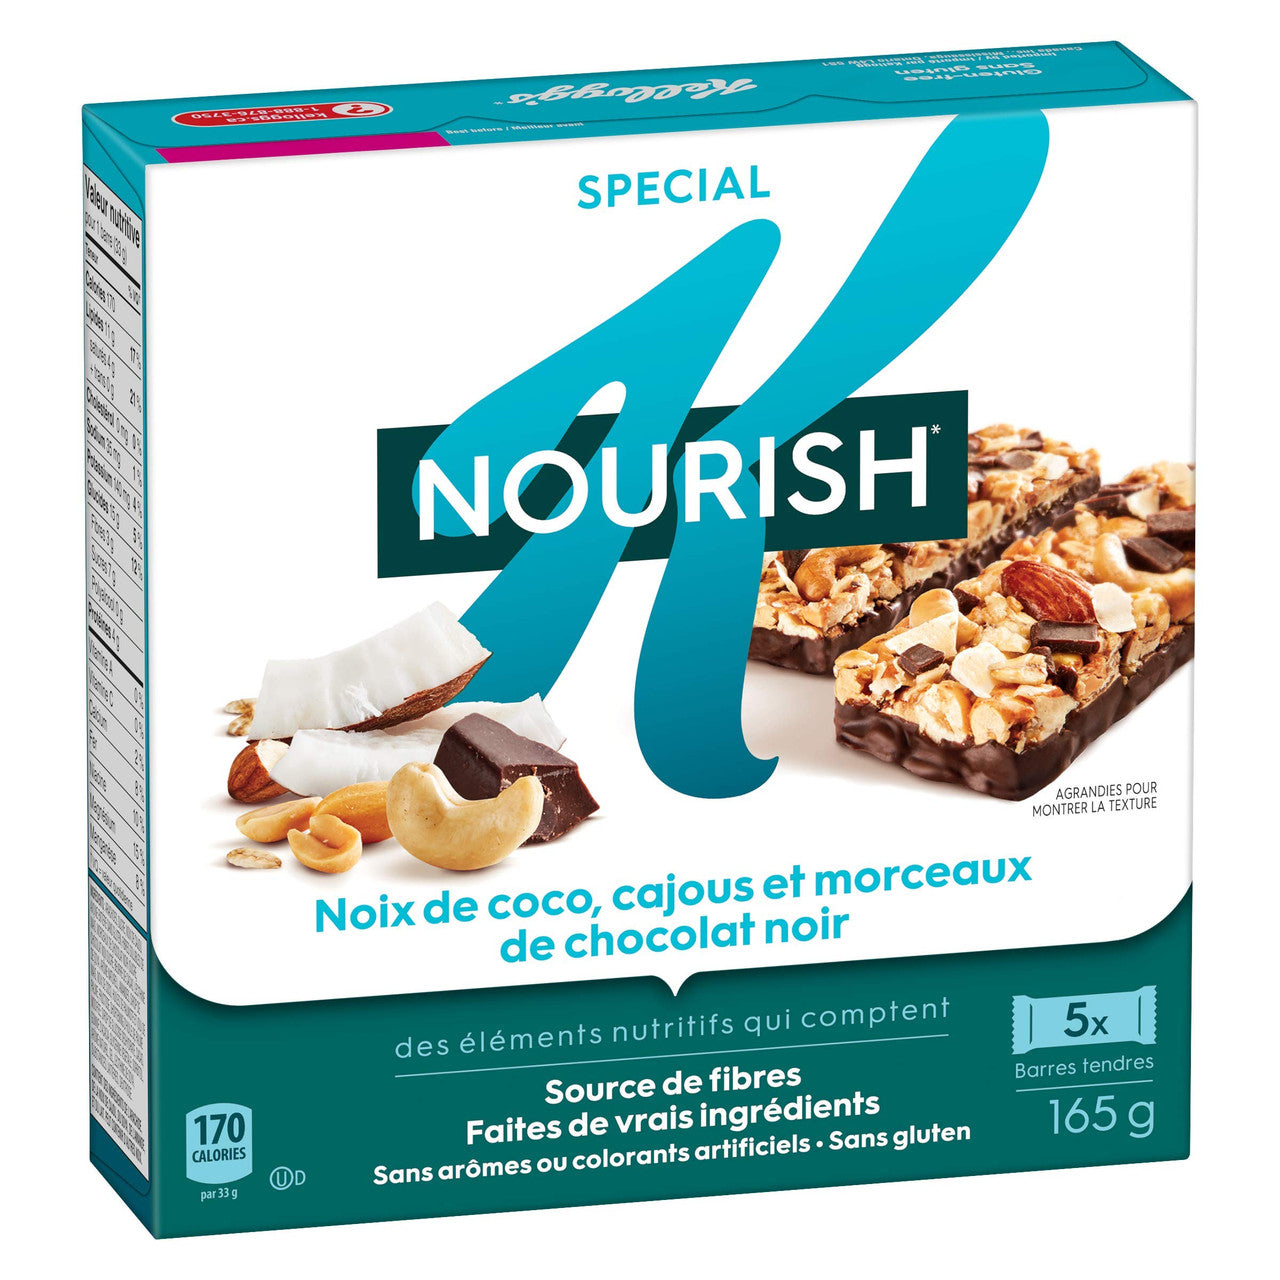 Kellogg's Special K Nourish Bar with Quinoa, Coconut Cashew and Dark Chocolate Chunks, 165g (Imported from Canada)